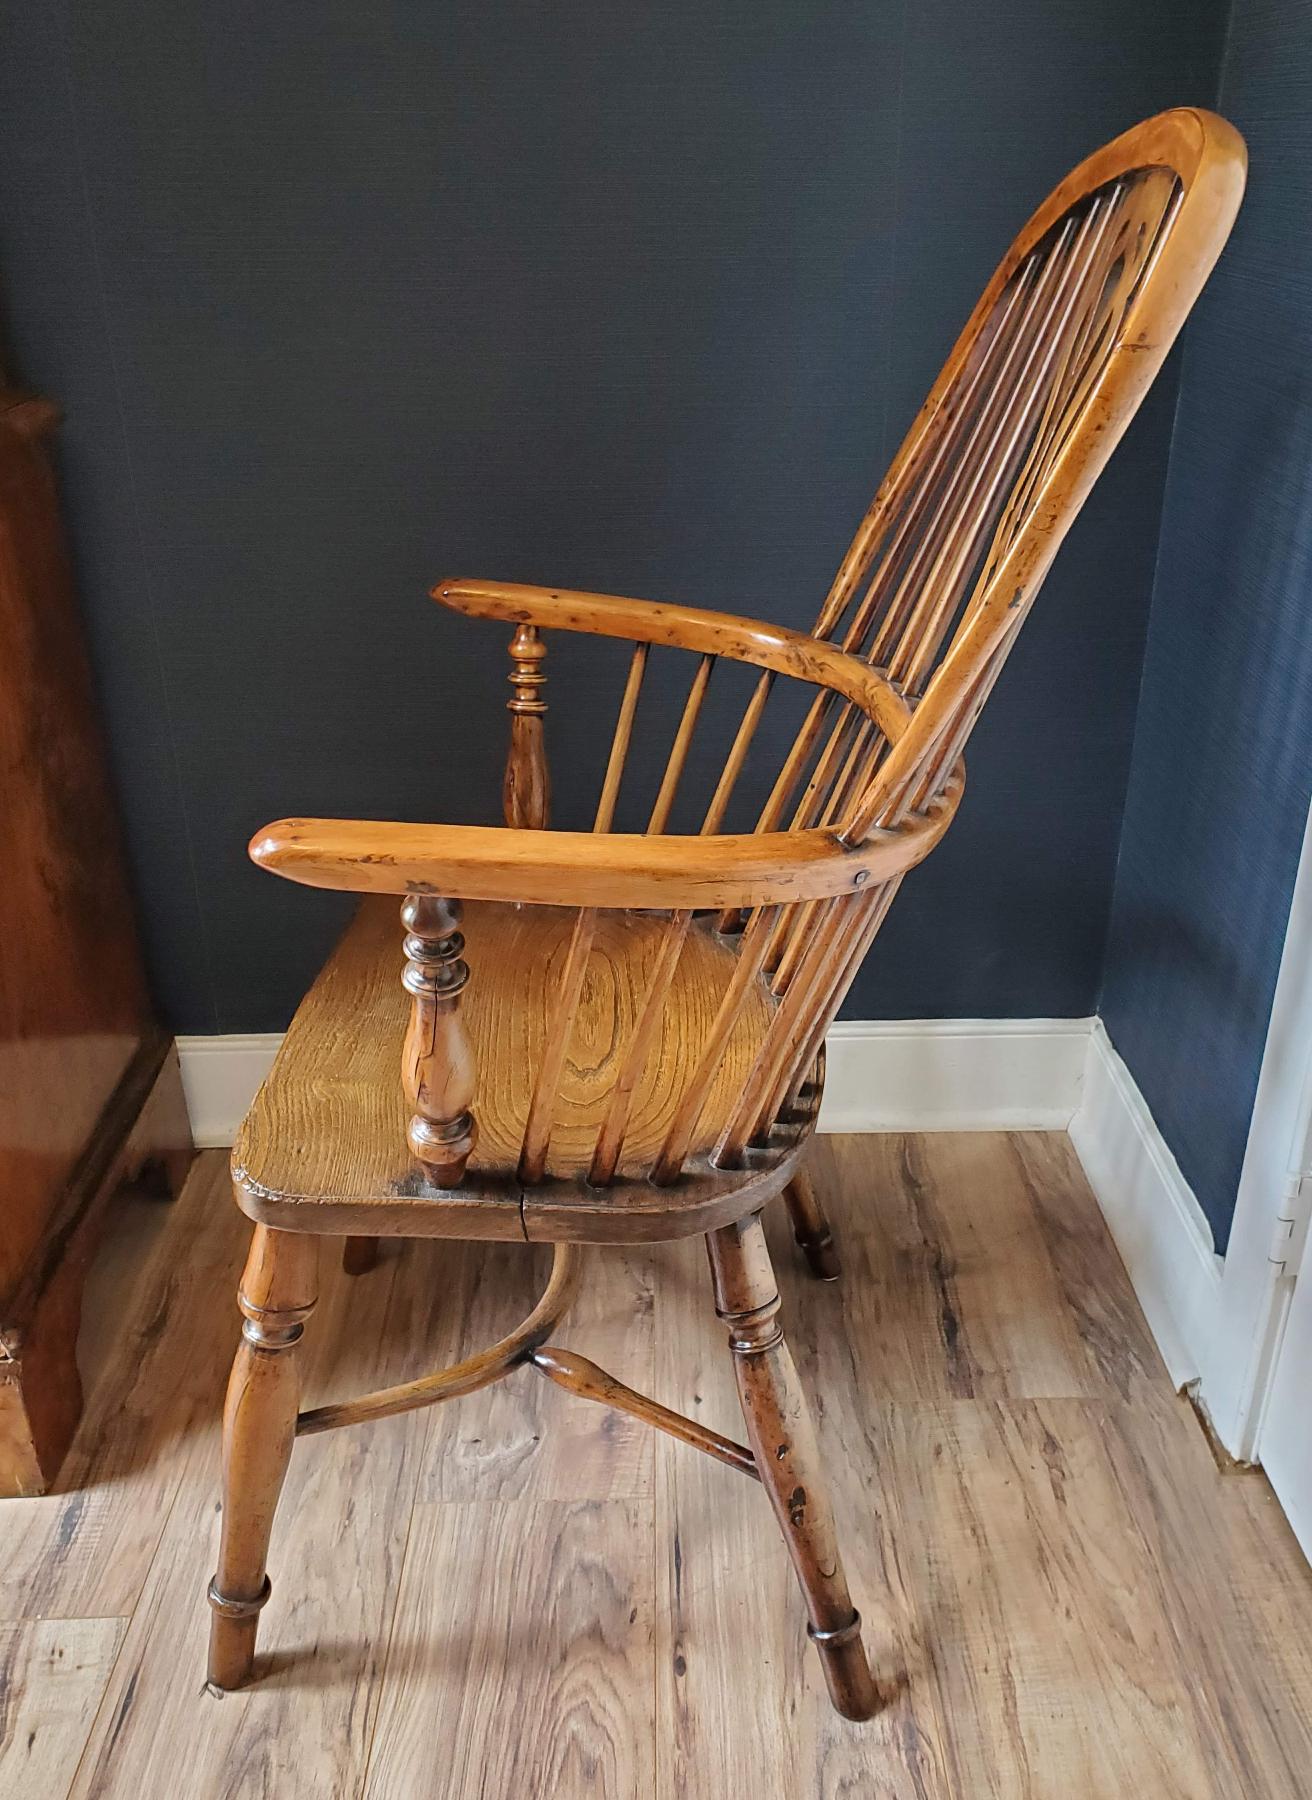 Rare Early 19th Century Yew Wood English George III “Bow Back” Windsor Armchair.  Fine quality, elegant proportions and extremely comfortable.  Rich patination and deep lustrous color. Shaped pierced splat with burled grain over figured elm seat